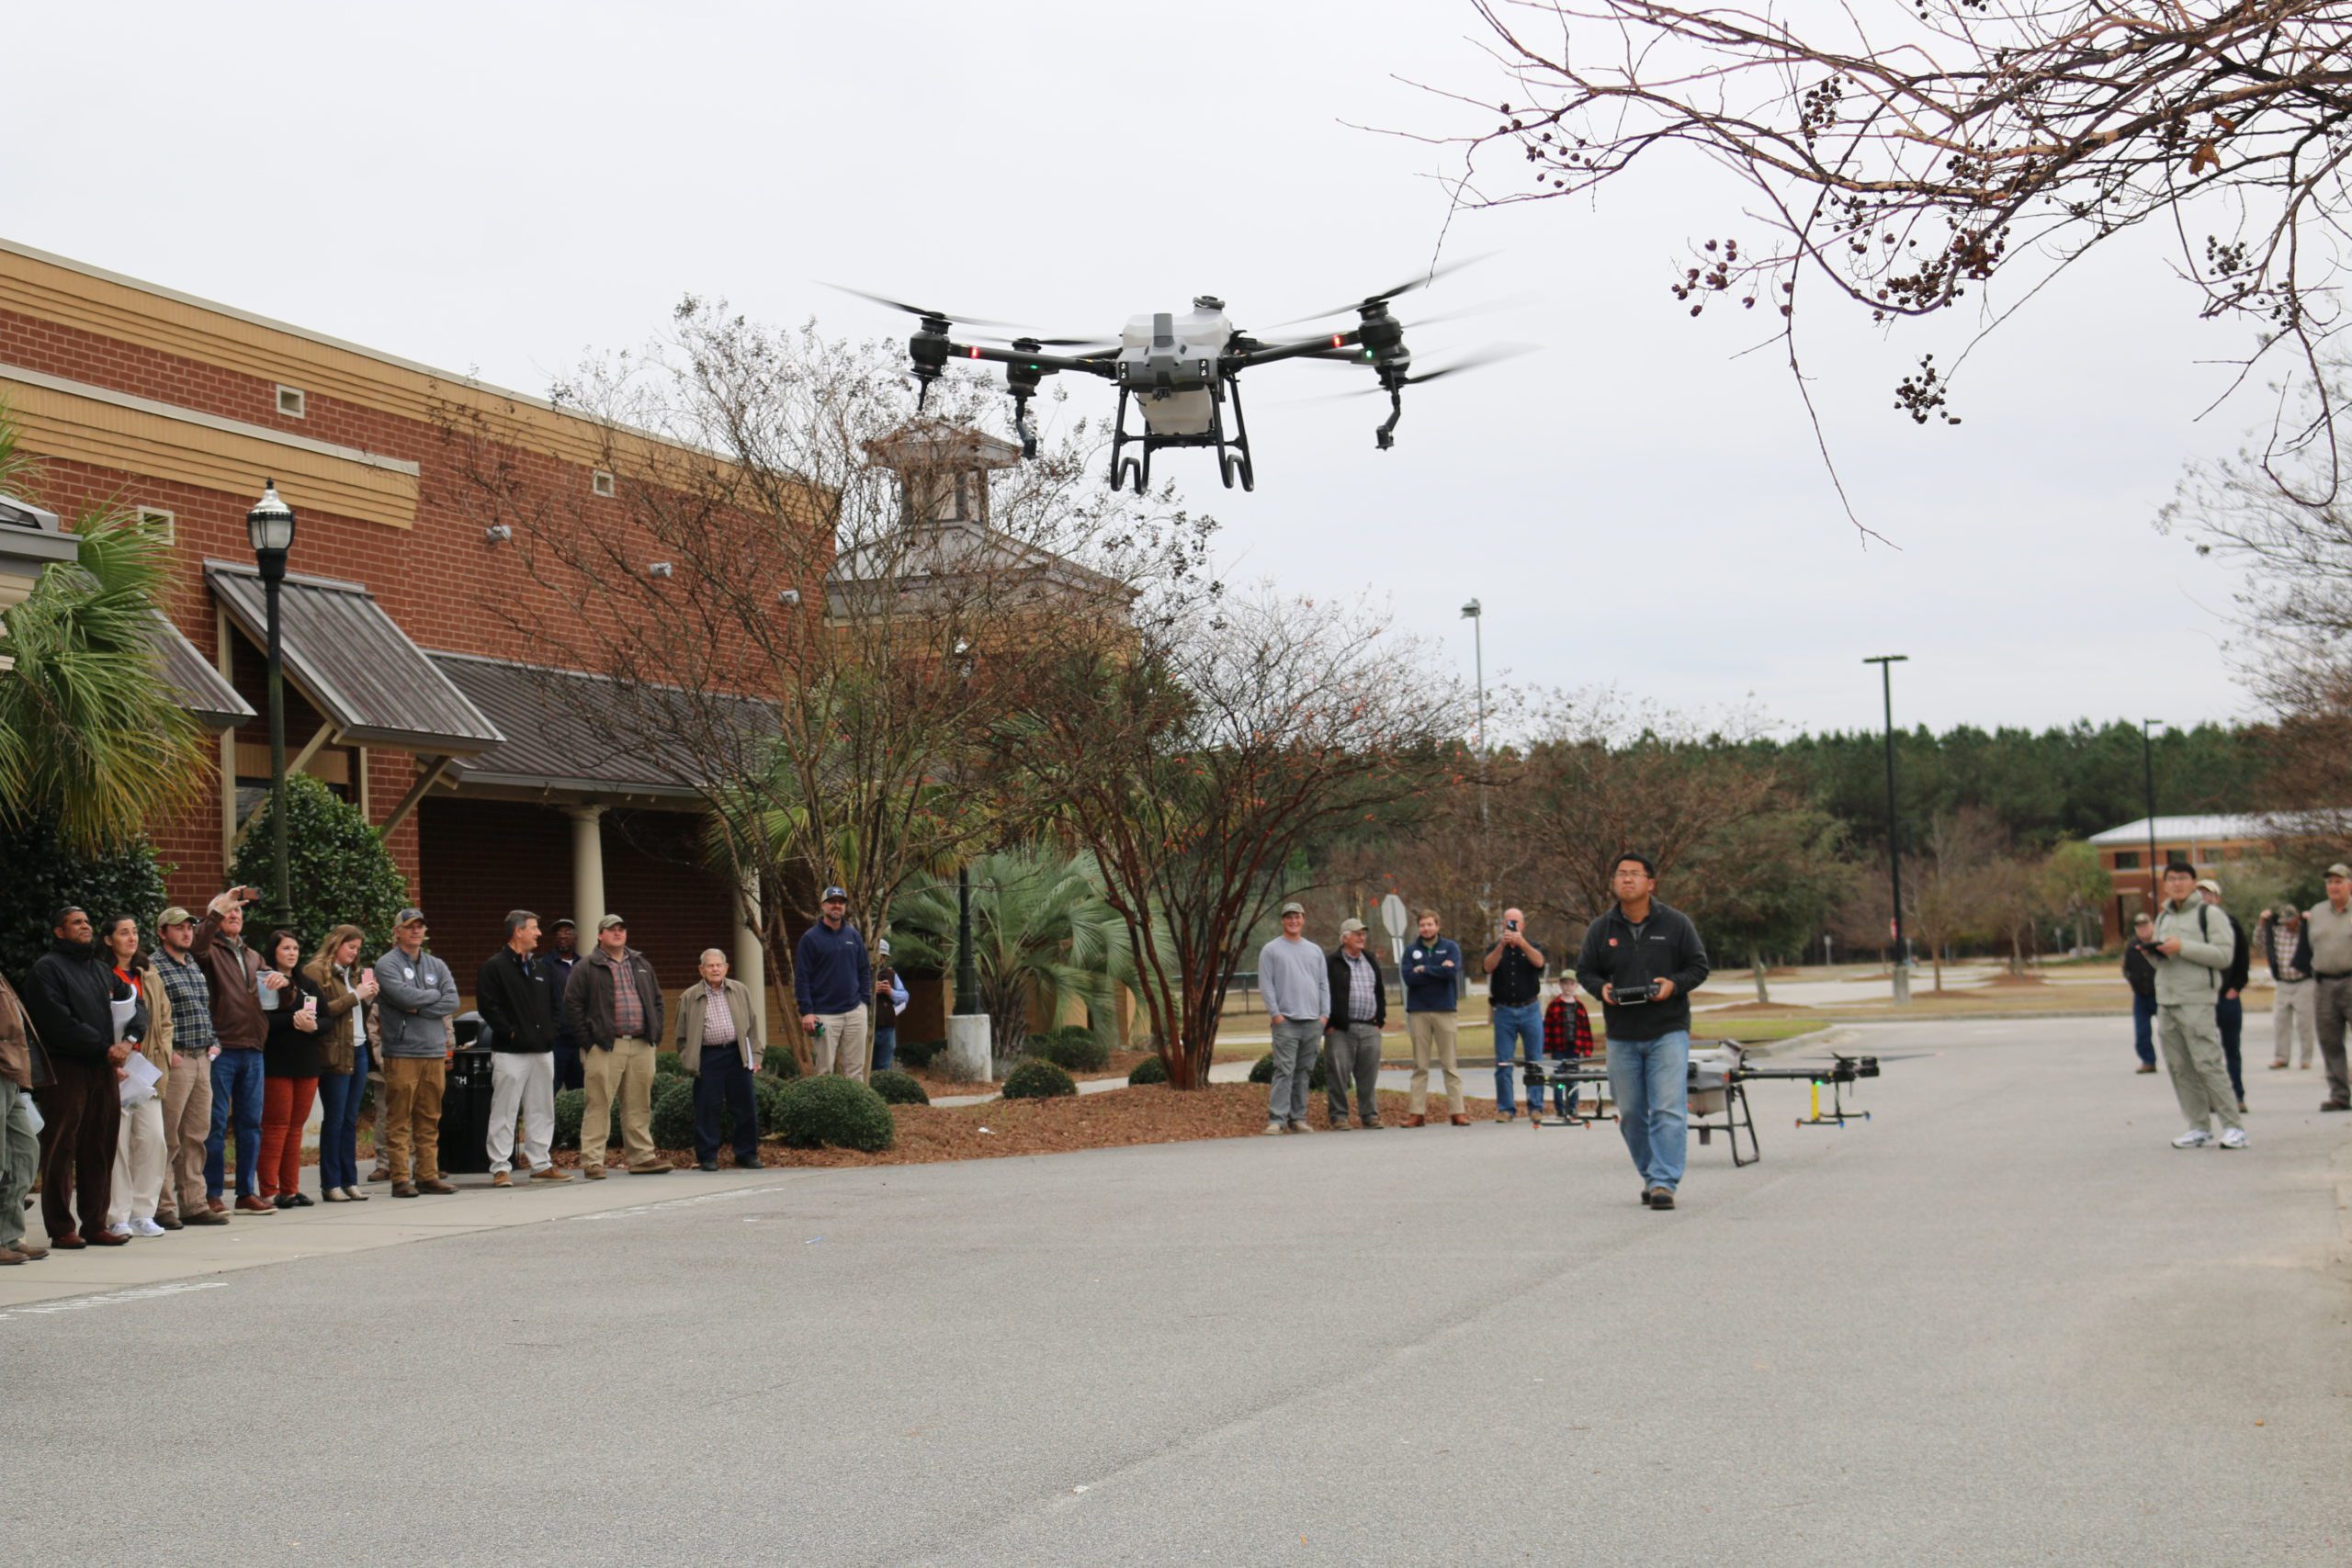 Attendees to the 2022 Clemson Corn and Soybean Growers' Meeting learned how Agri Spray Drones are being used in agriculture research.